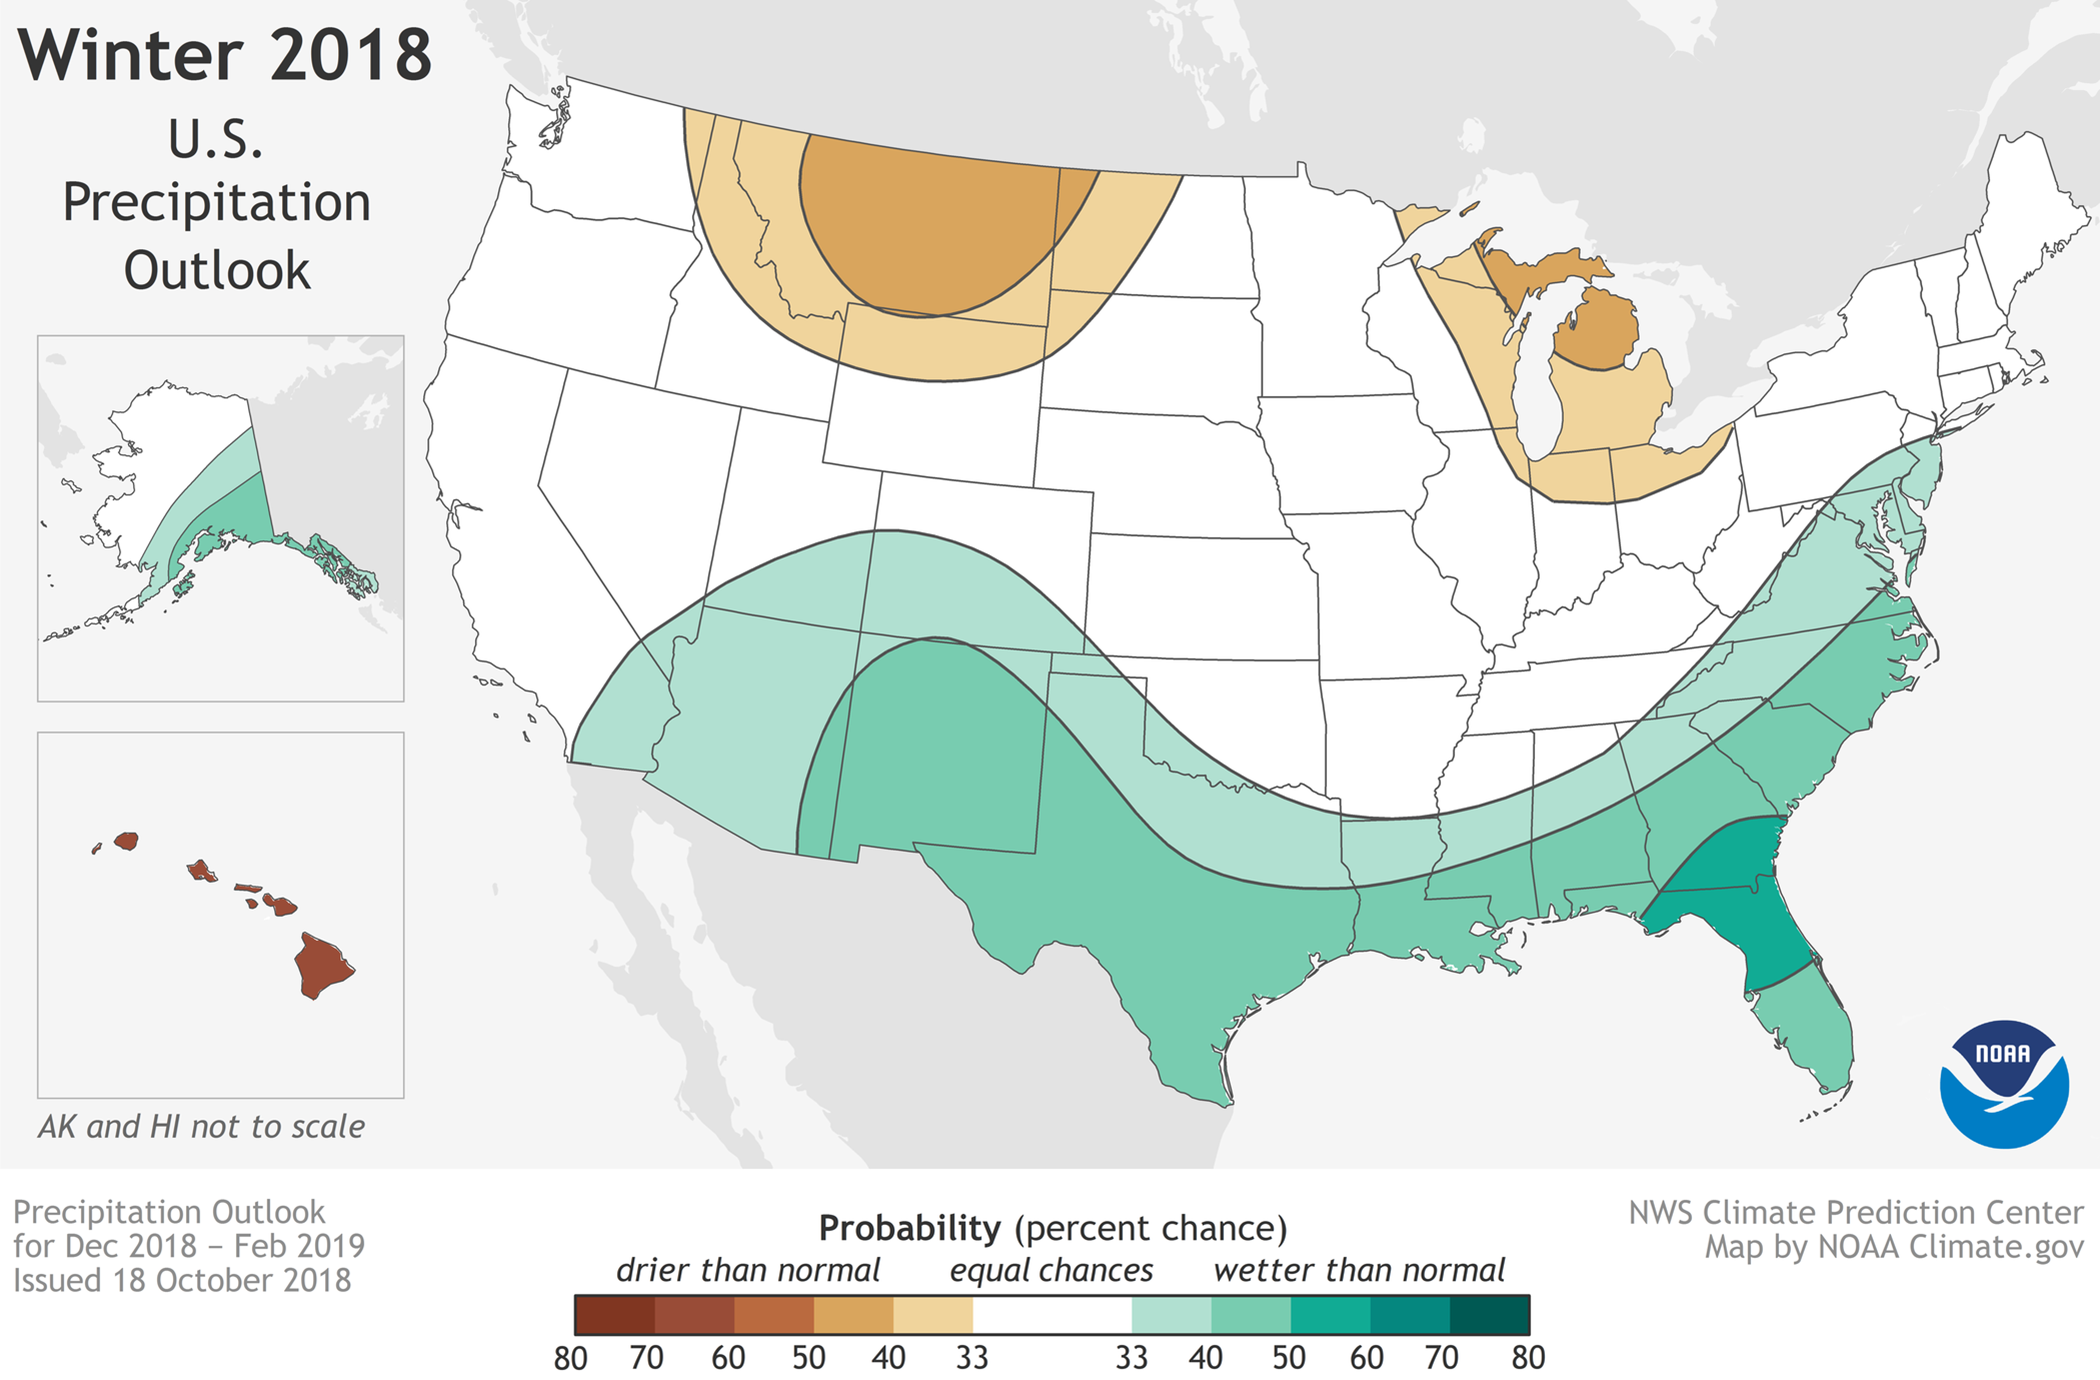 2018-19 Winter Outlook map for precipitation.